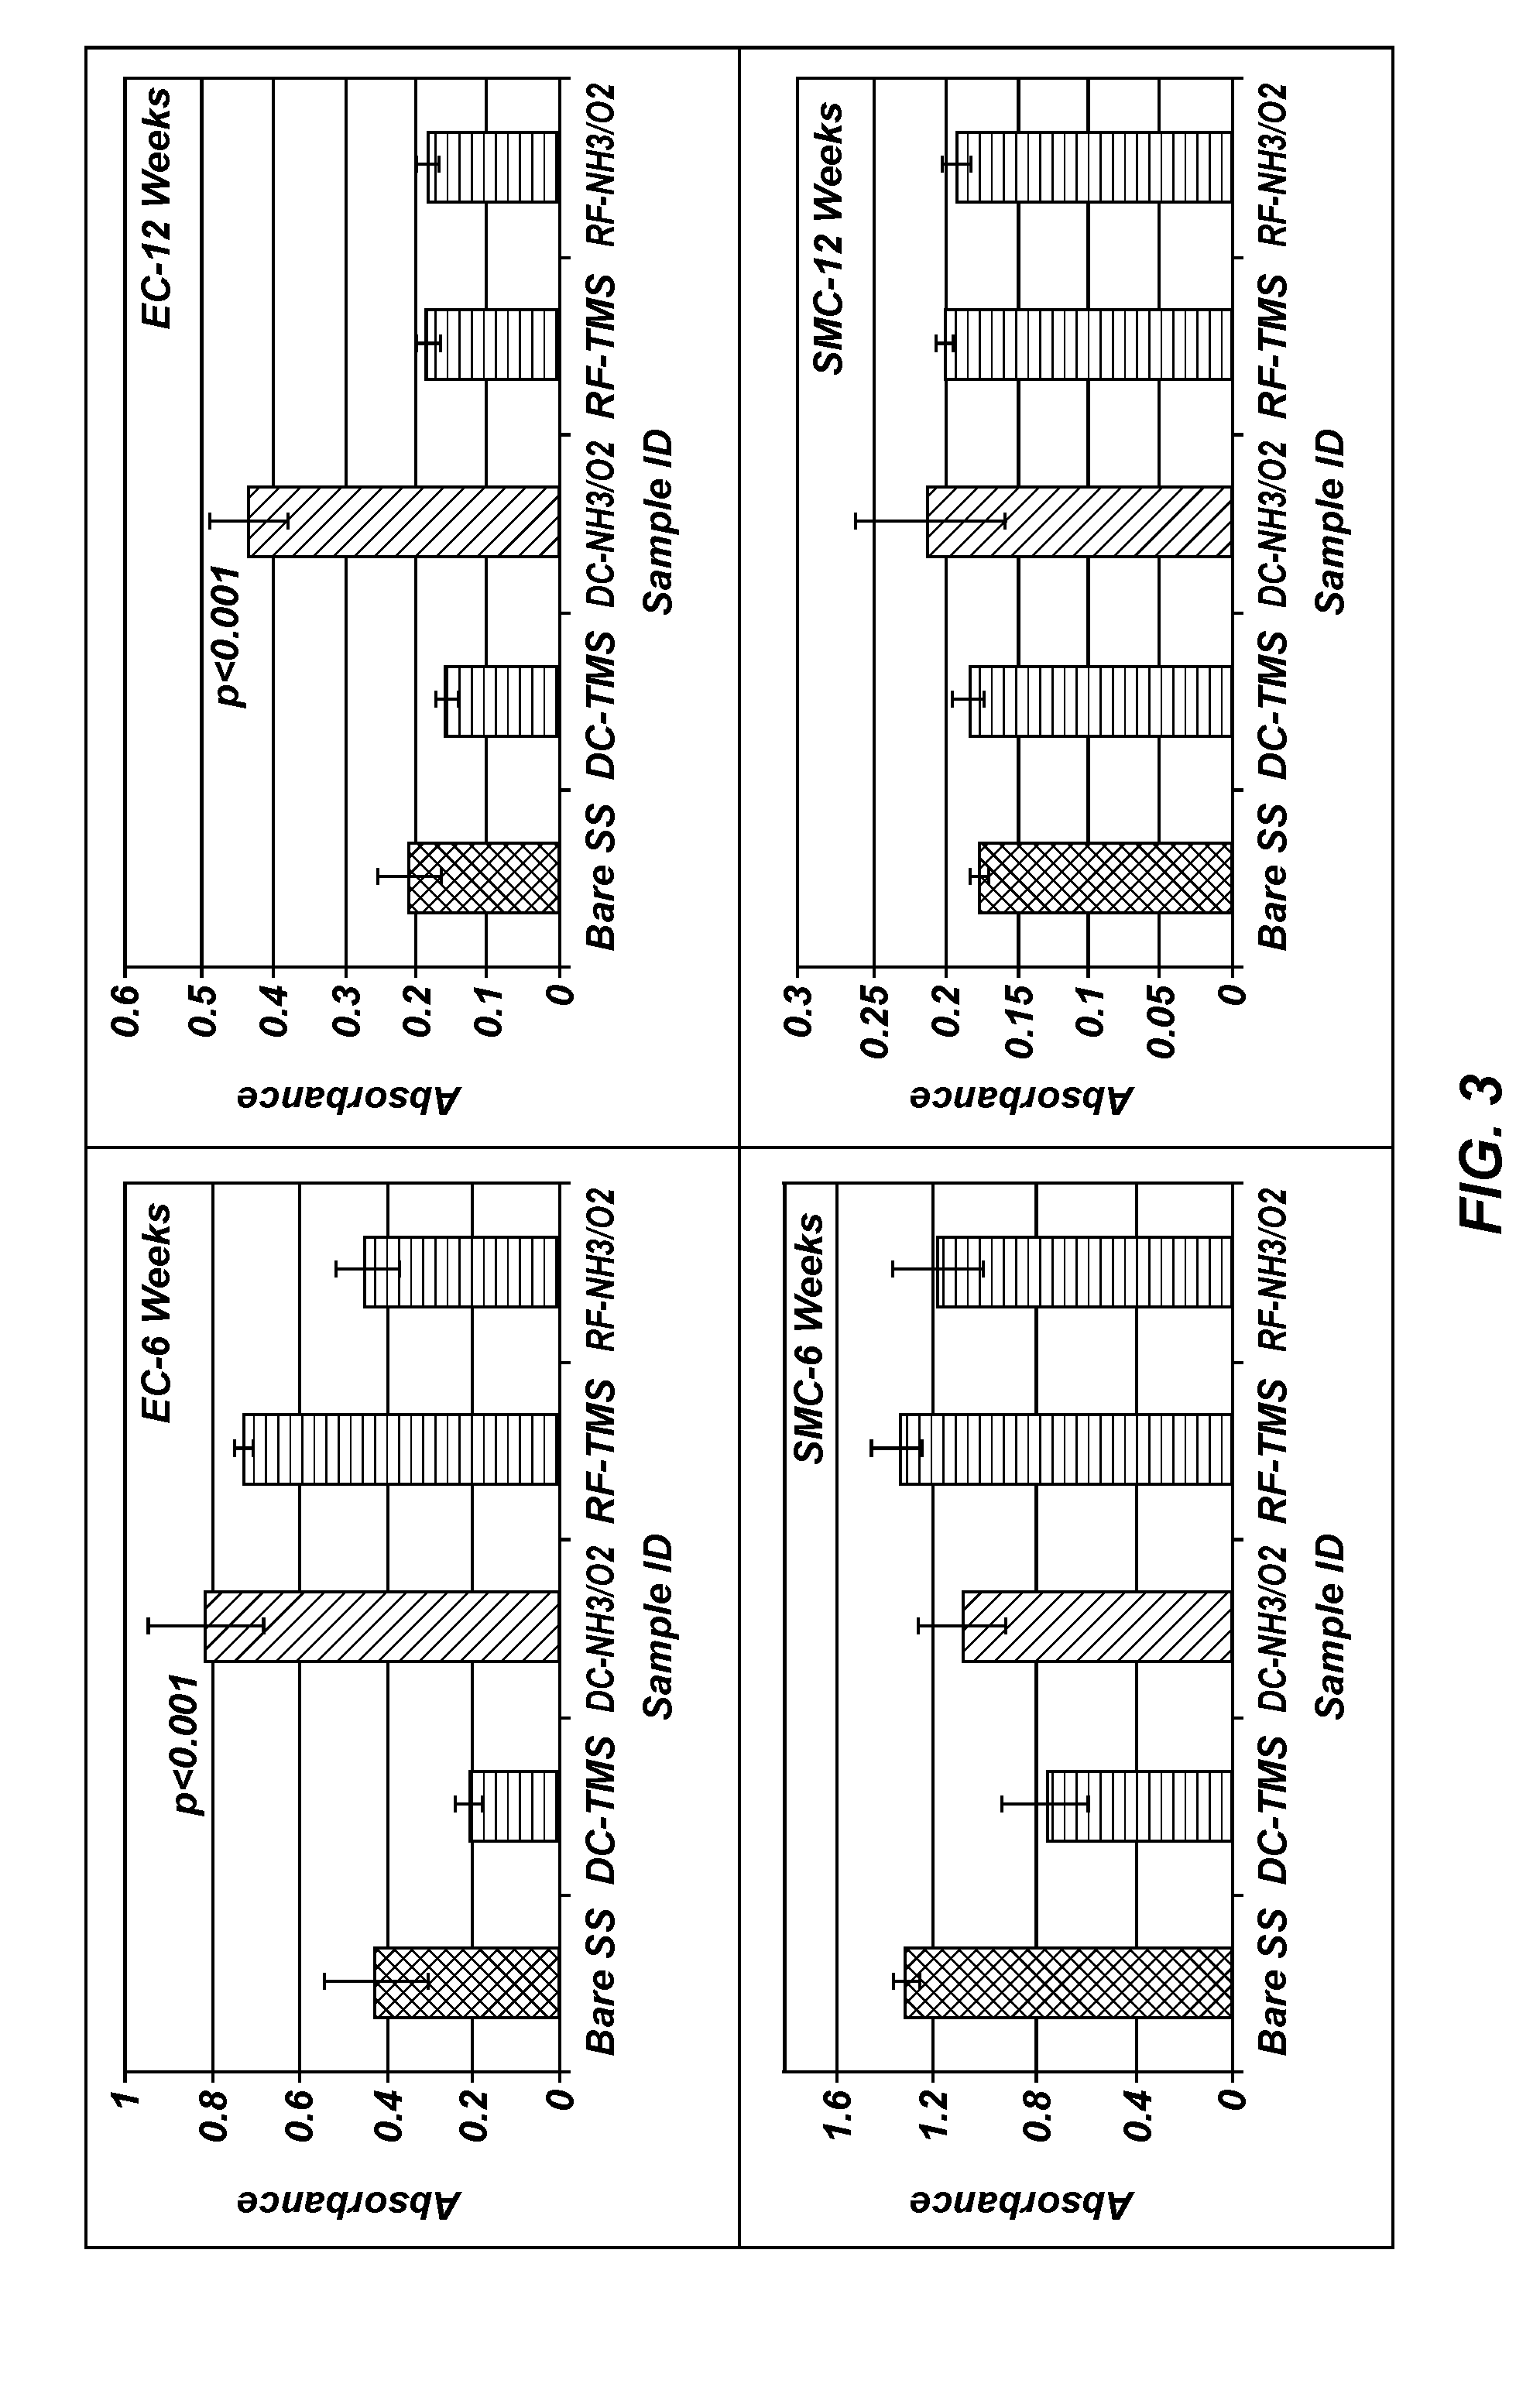 Plasma modified medical devices and methods